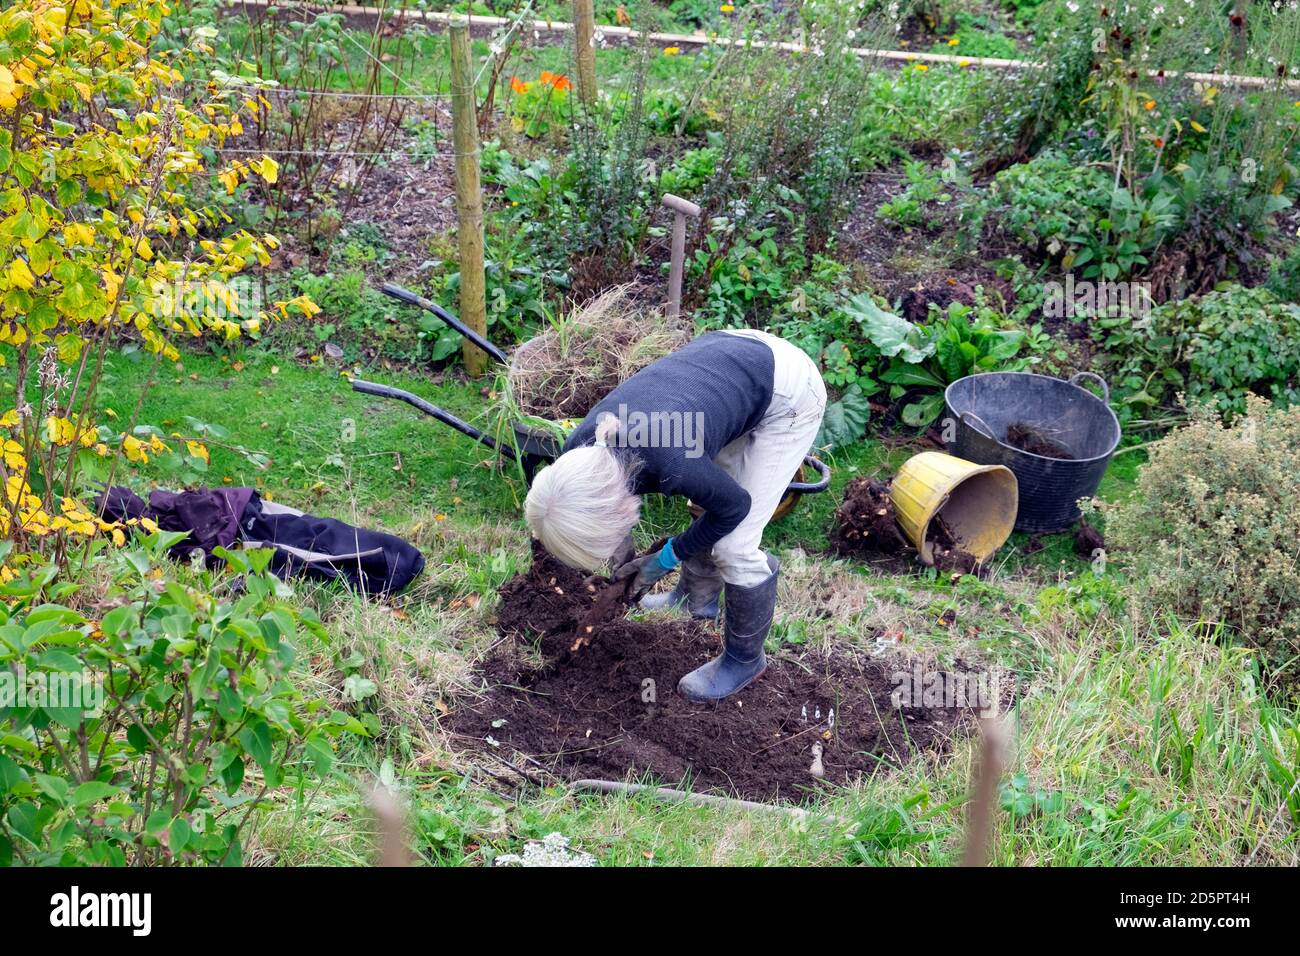 Woman bending over in the garden in autumn digging out an old stump to plant a perennial shrub Carmarthenshire Wales UK Great Britain   KATHY DEWITT Stock Photo